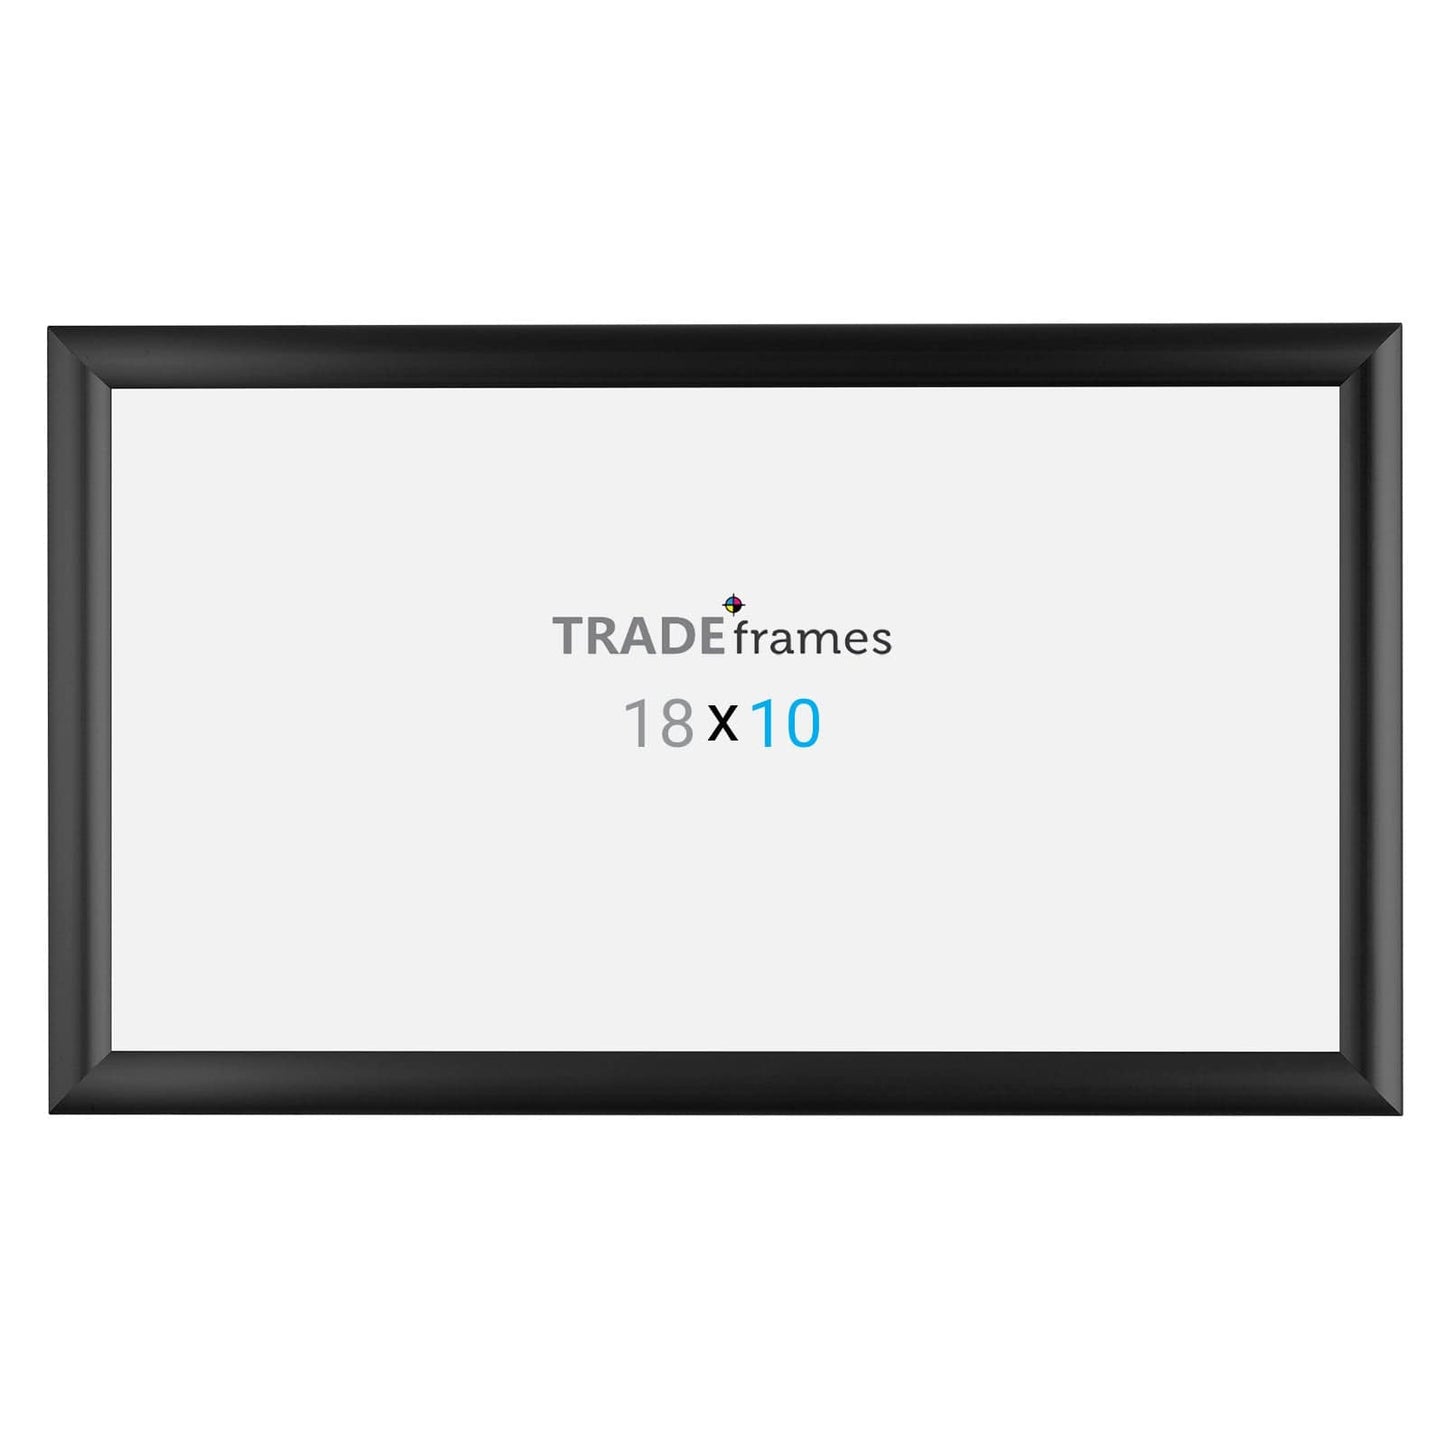 10x18 Inches Black Snap Frame - 1" Profile - Snap Frames Direct